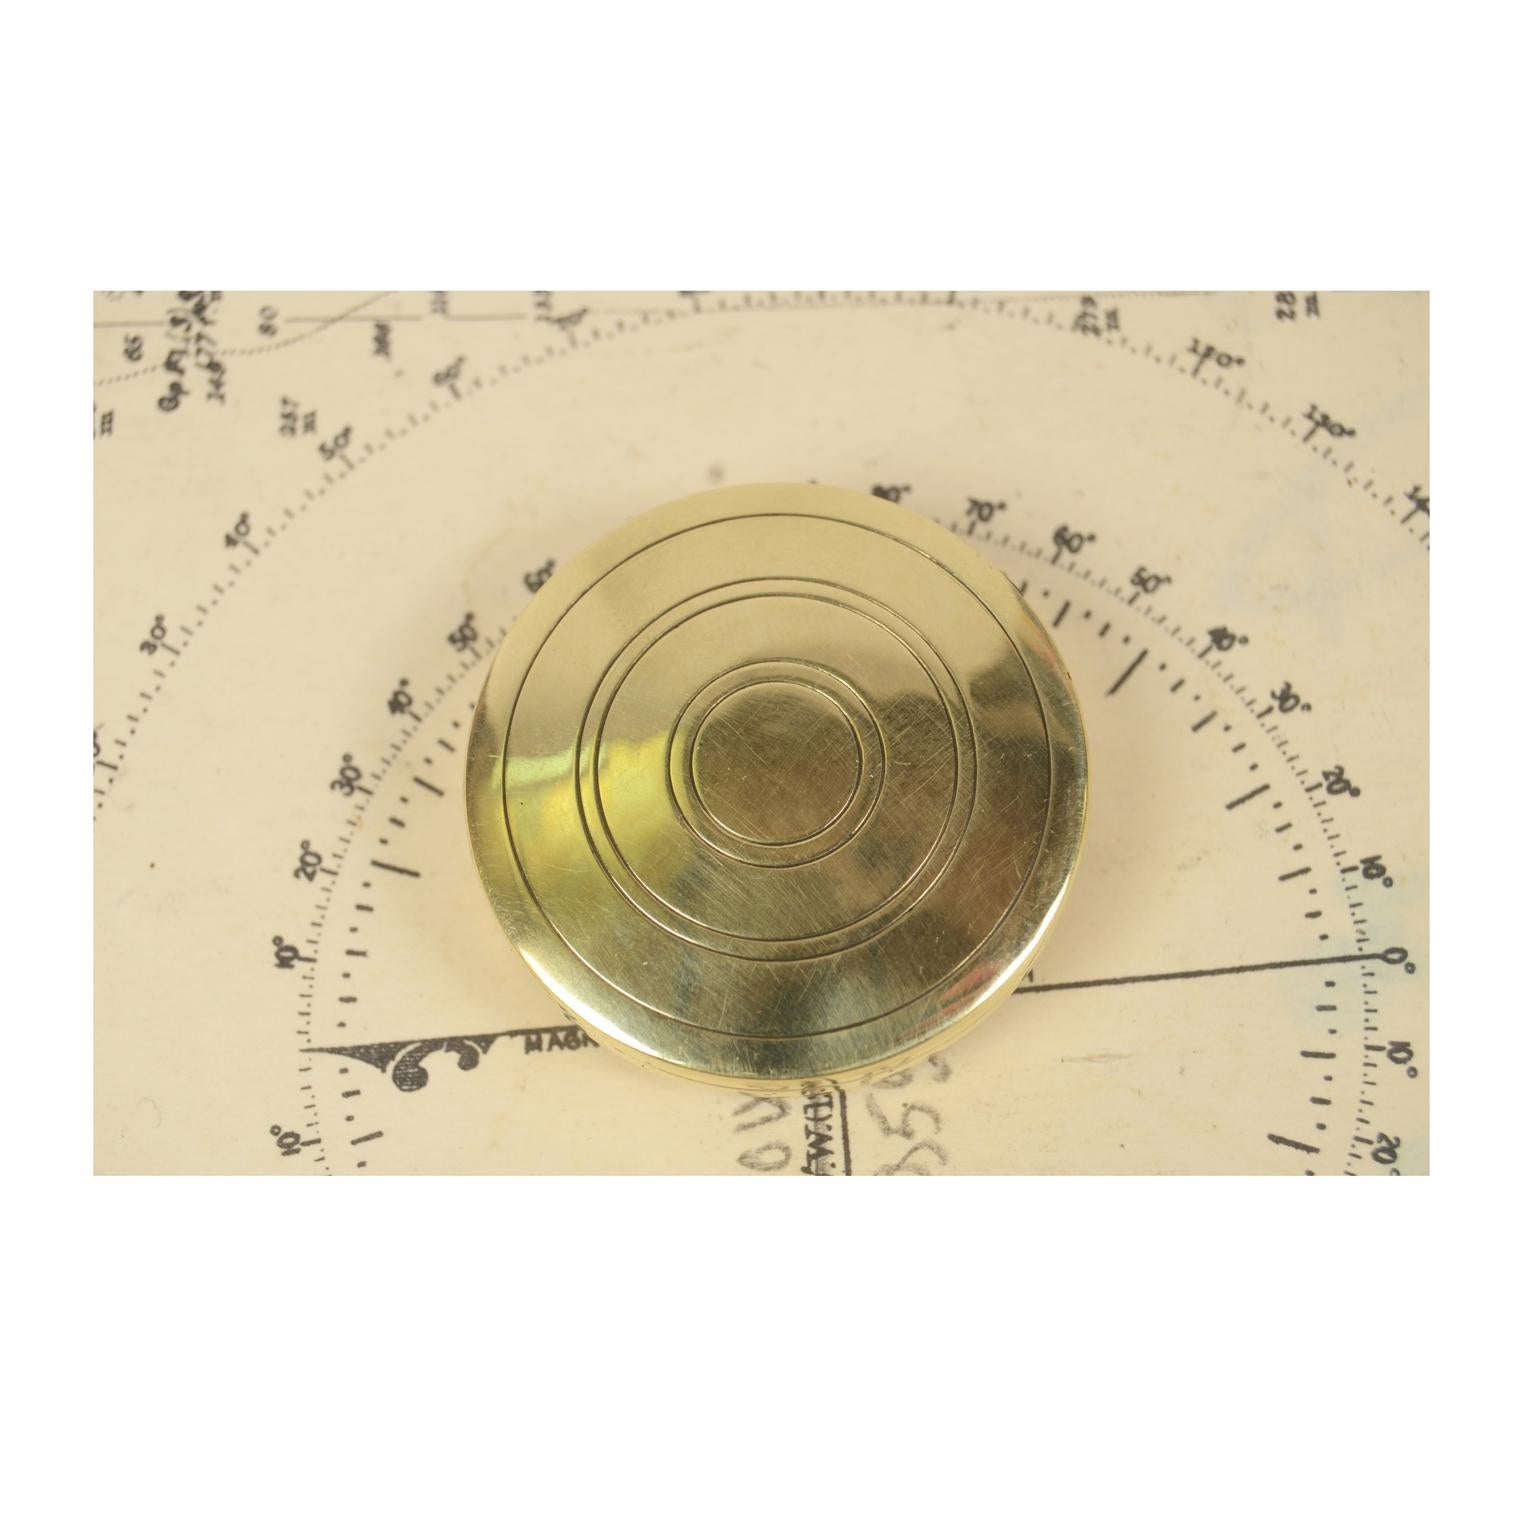 British Victorian Brass Compass Made in the Late 1900s